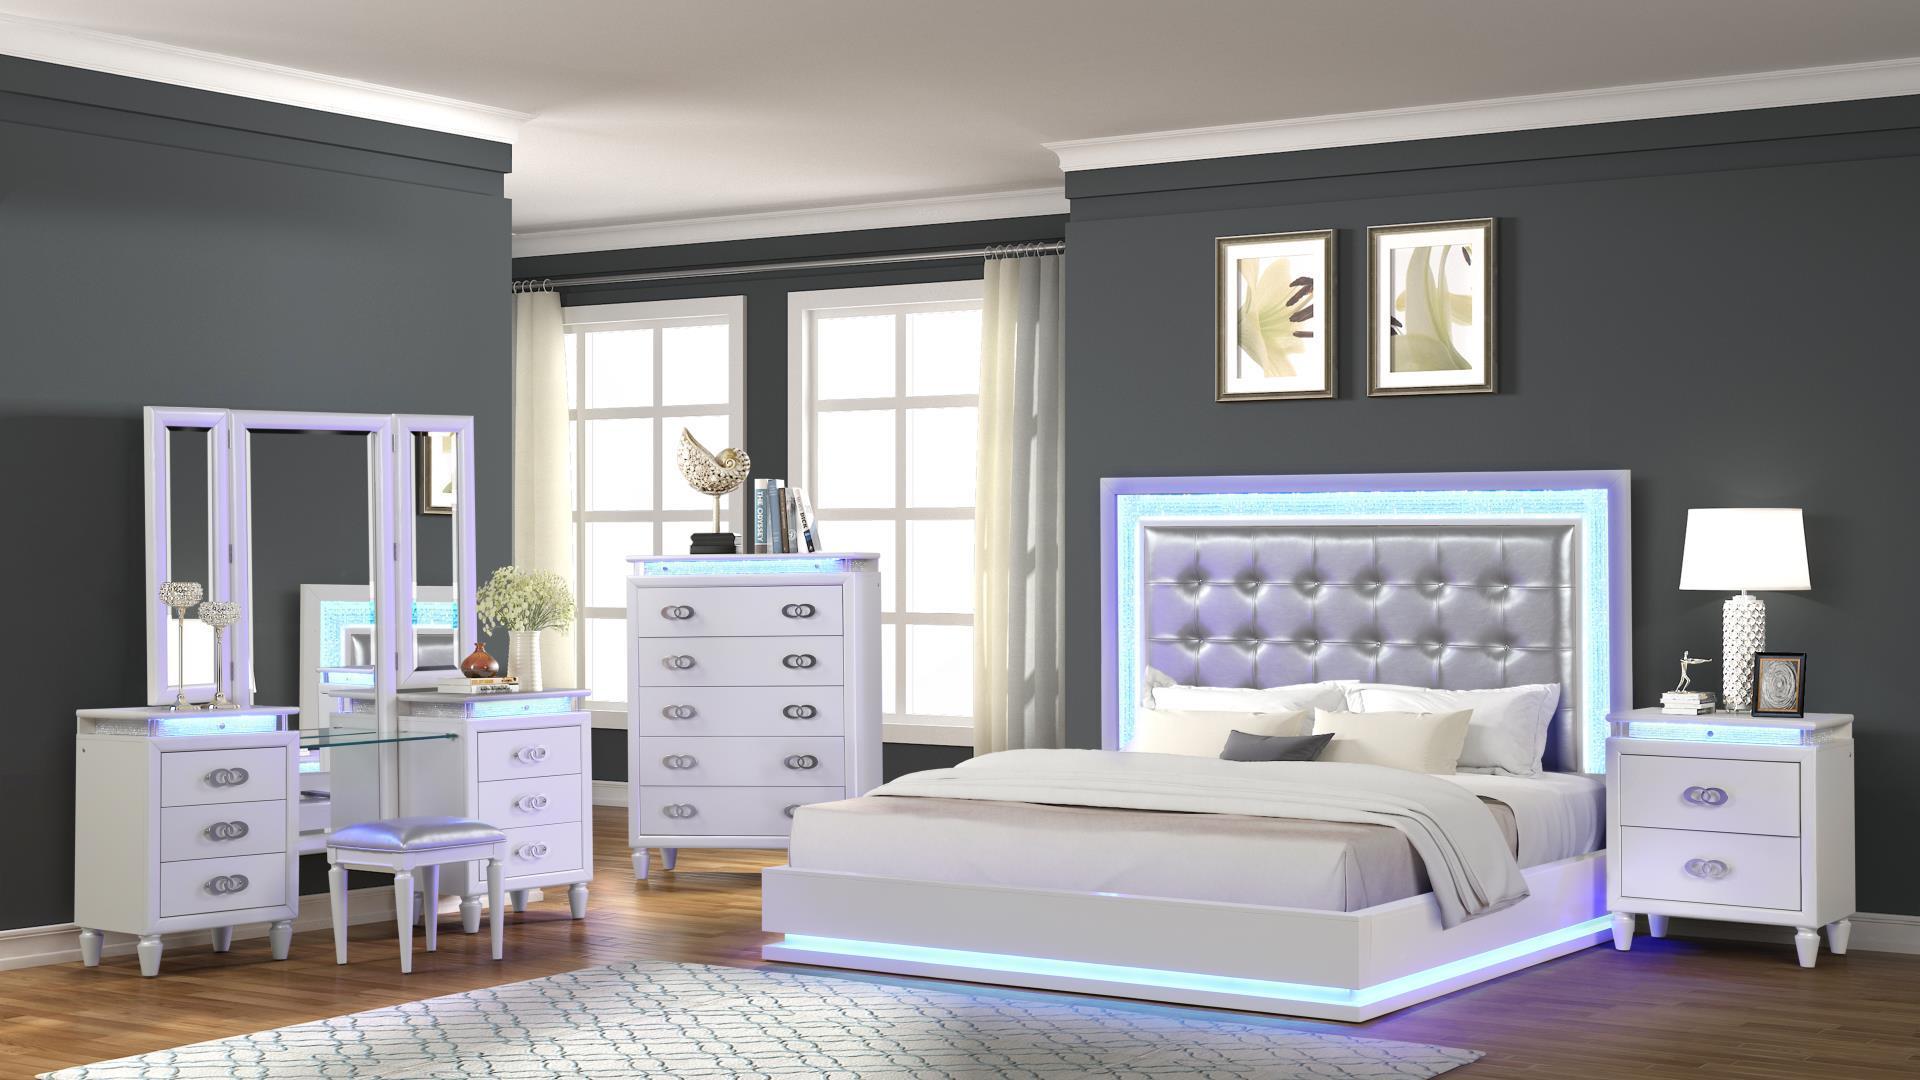 

    
Milky White Tufted King Led Bed Set w/Vanity 4P PASSION Galaxy Home Contemporary
